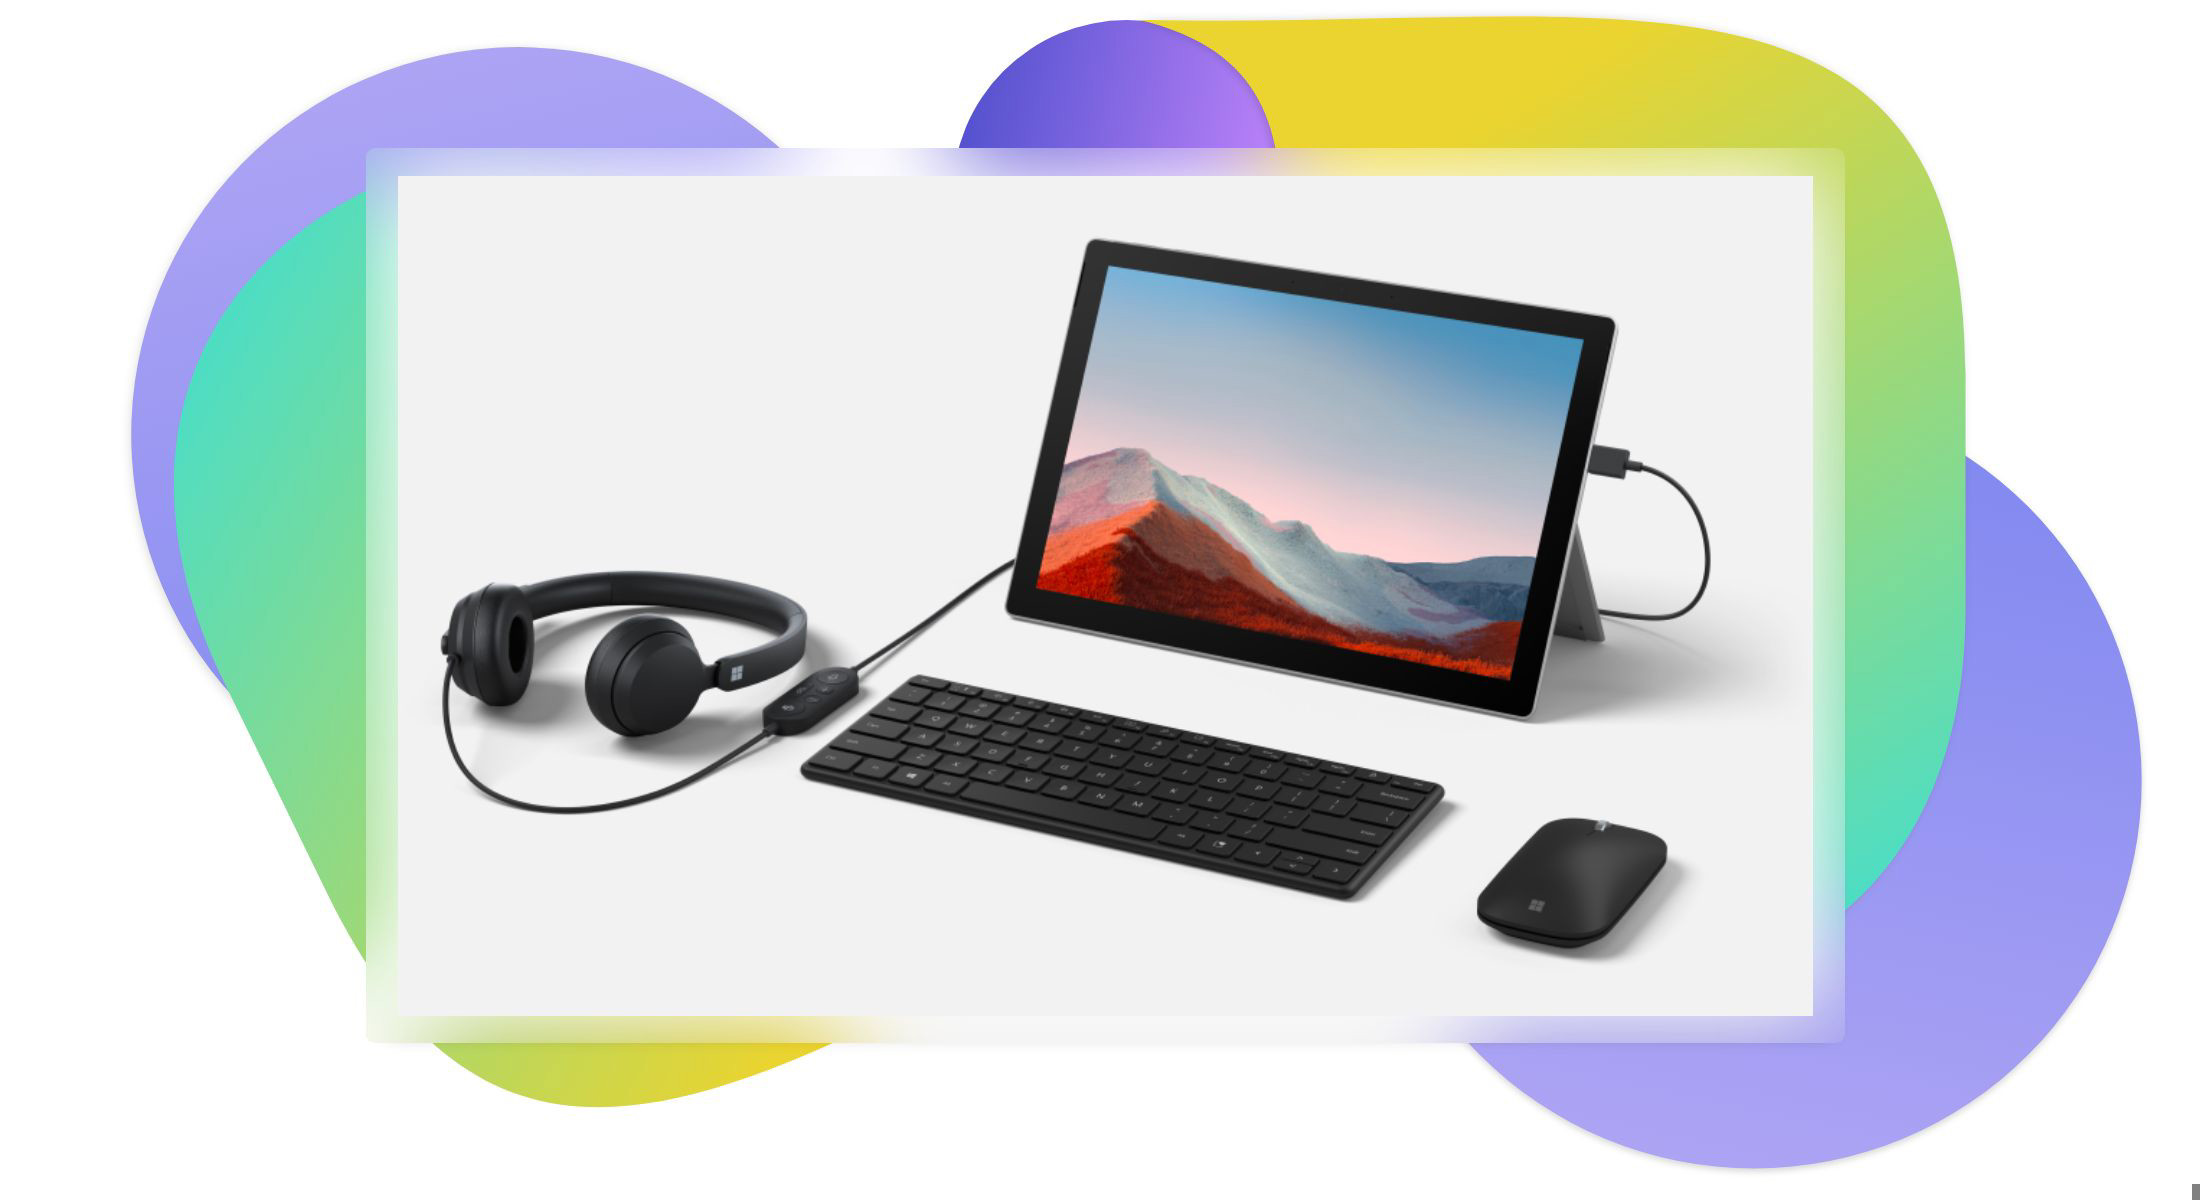 A tablet, bluetooth keyboard, over the ear headphones and a bluetooth mouse.